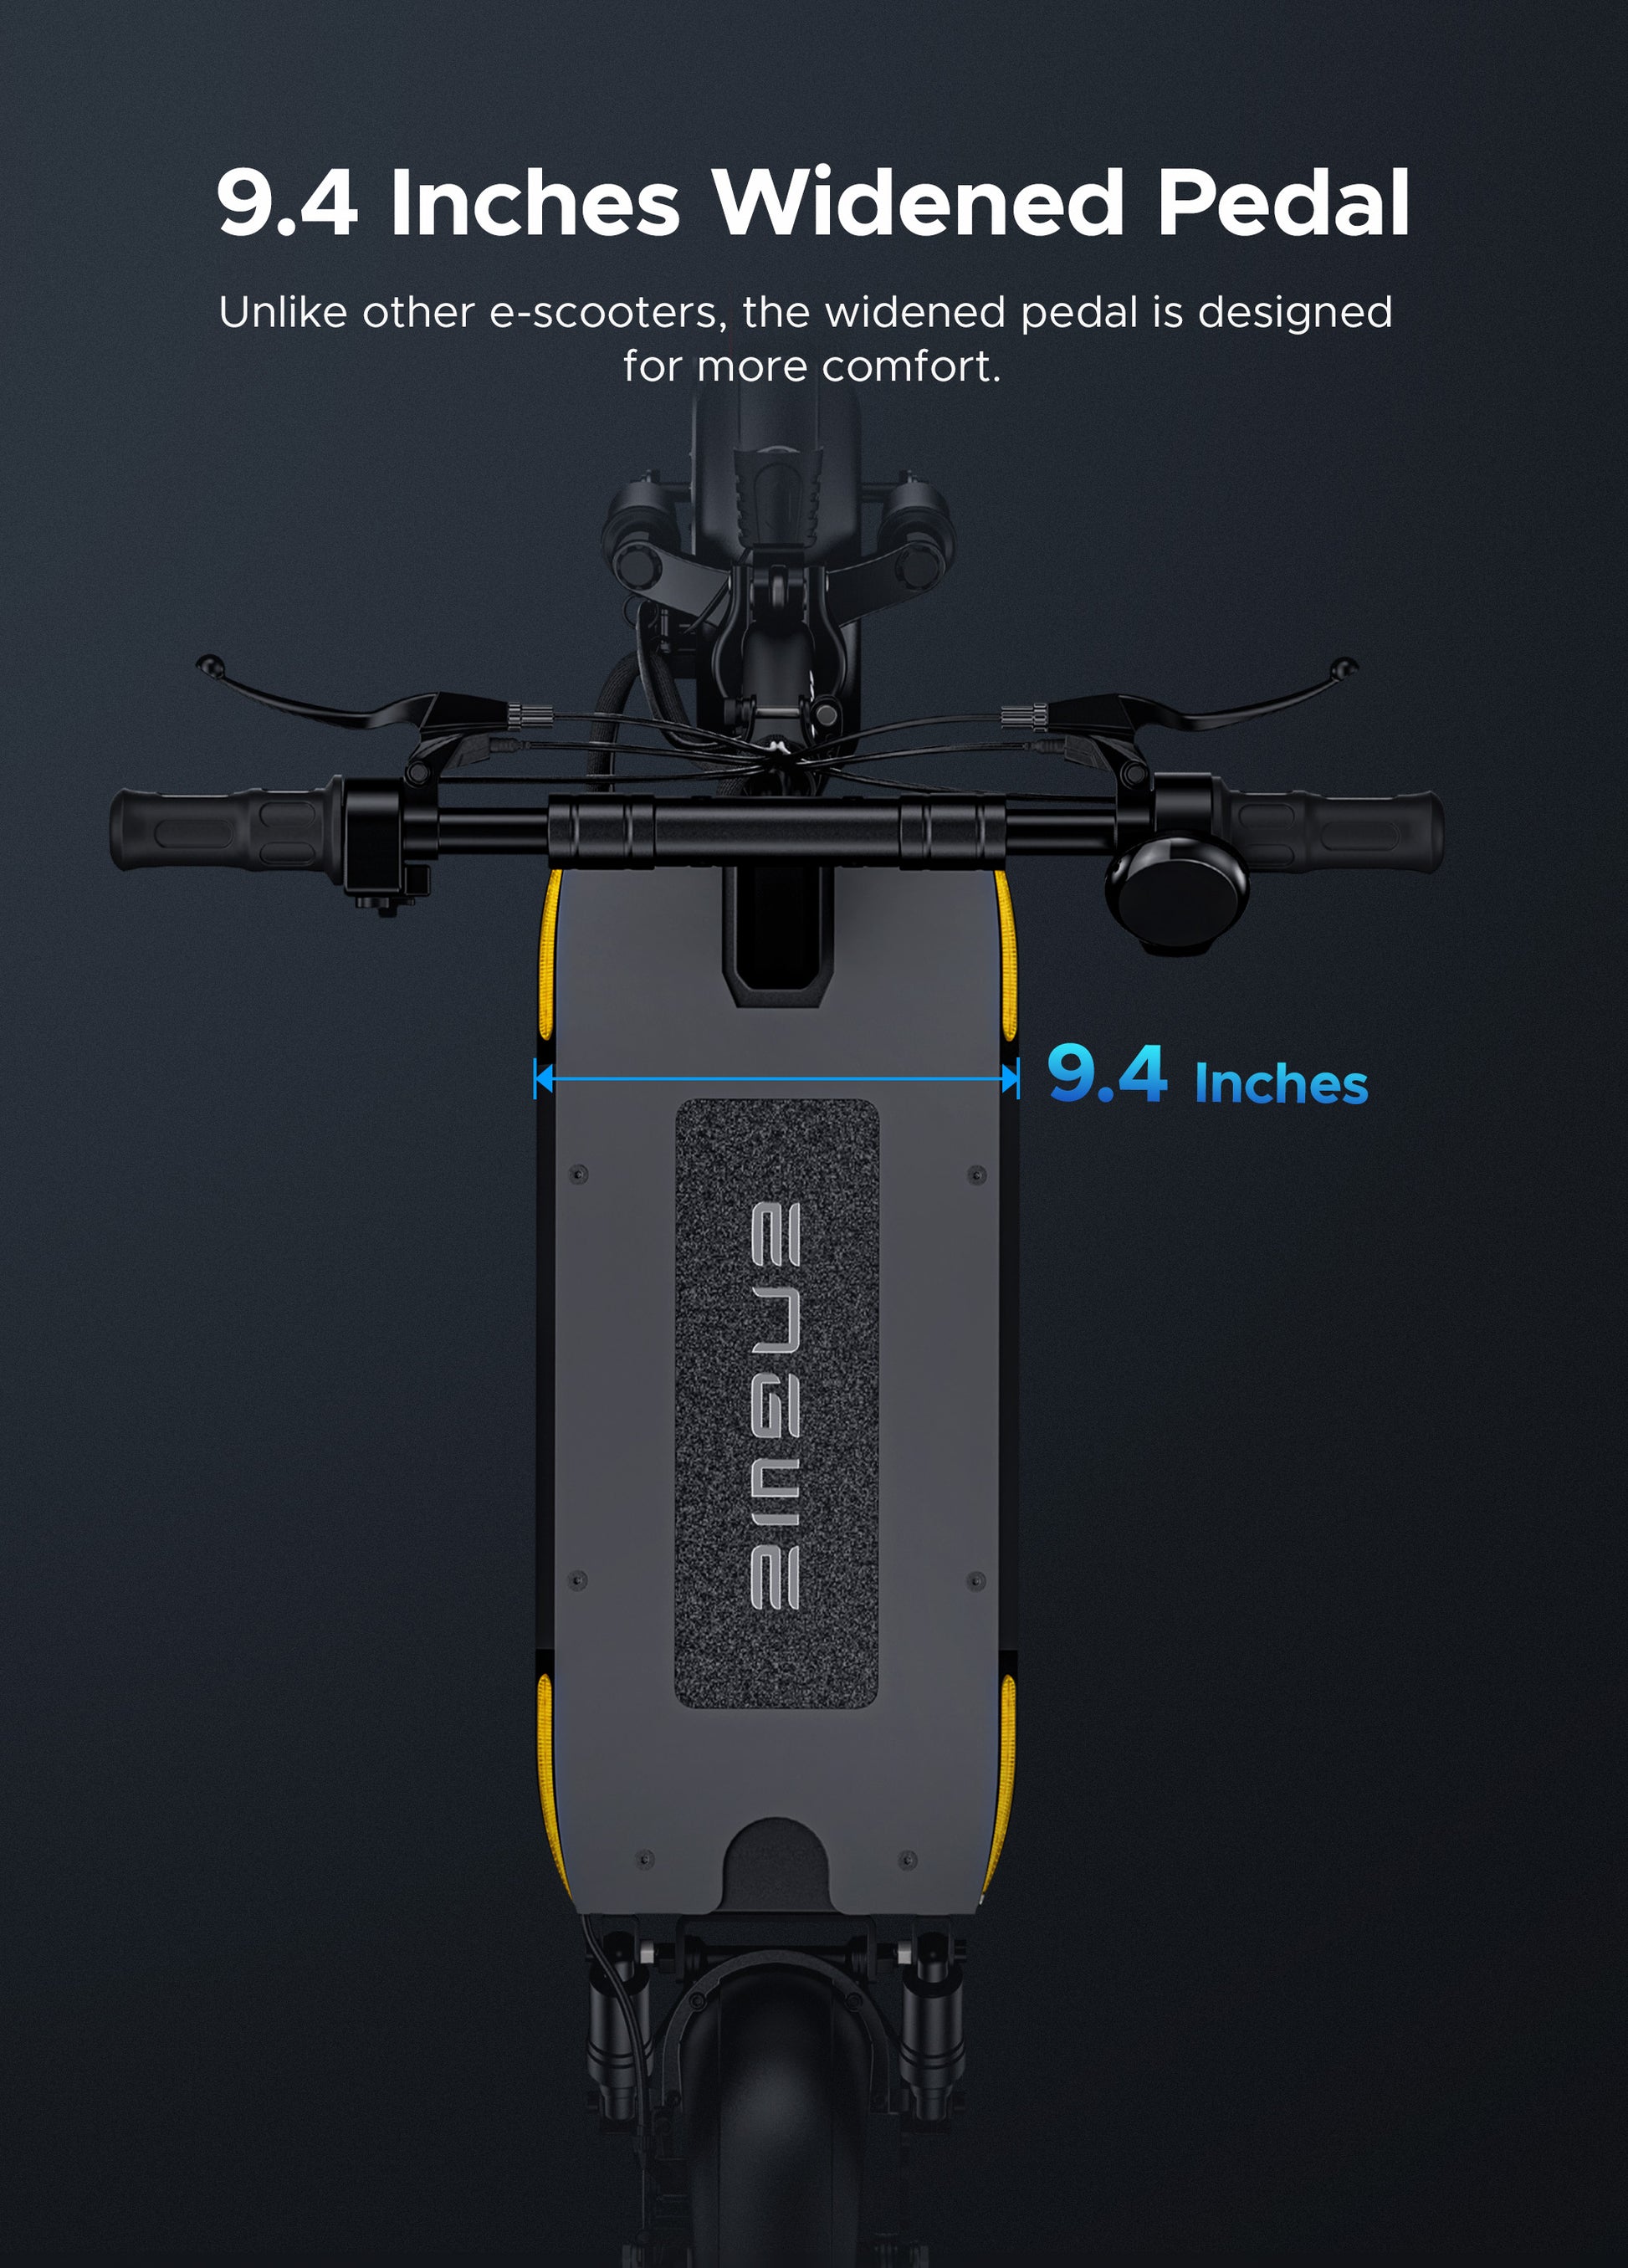 Engwe S6 electric scooter's wide pedal platform, emphasizing rider comfort and stability